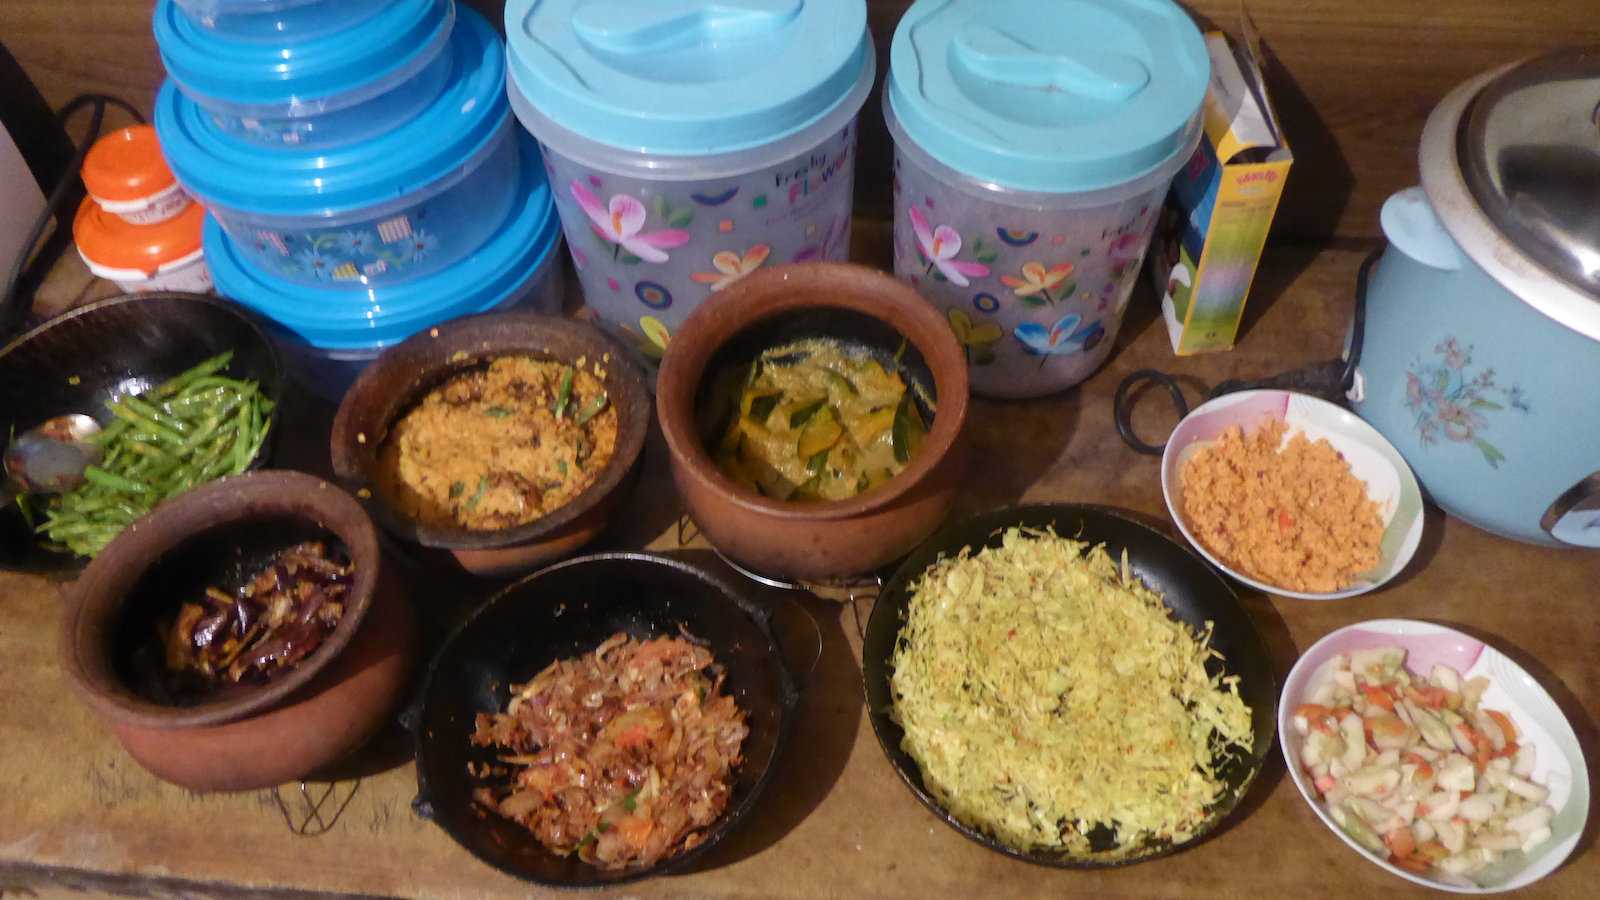 Rice and curry is the most popular Sri Lankan food, but there are so many variants!